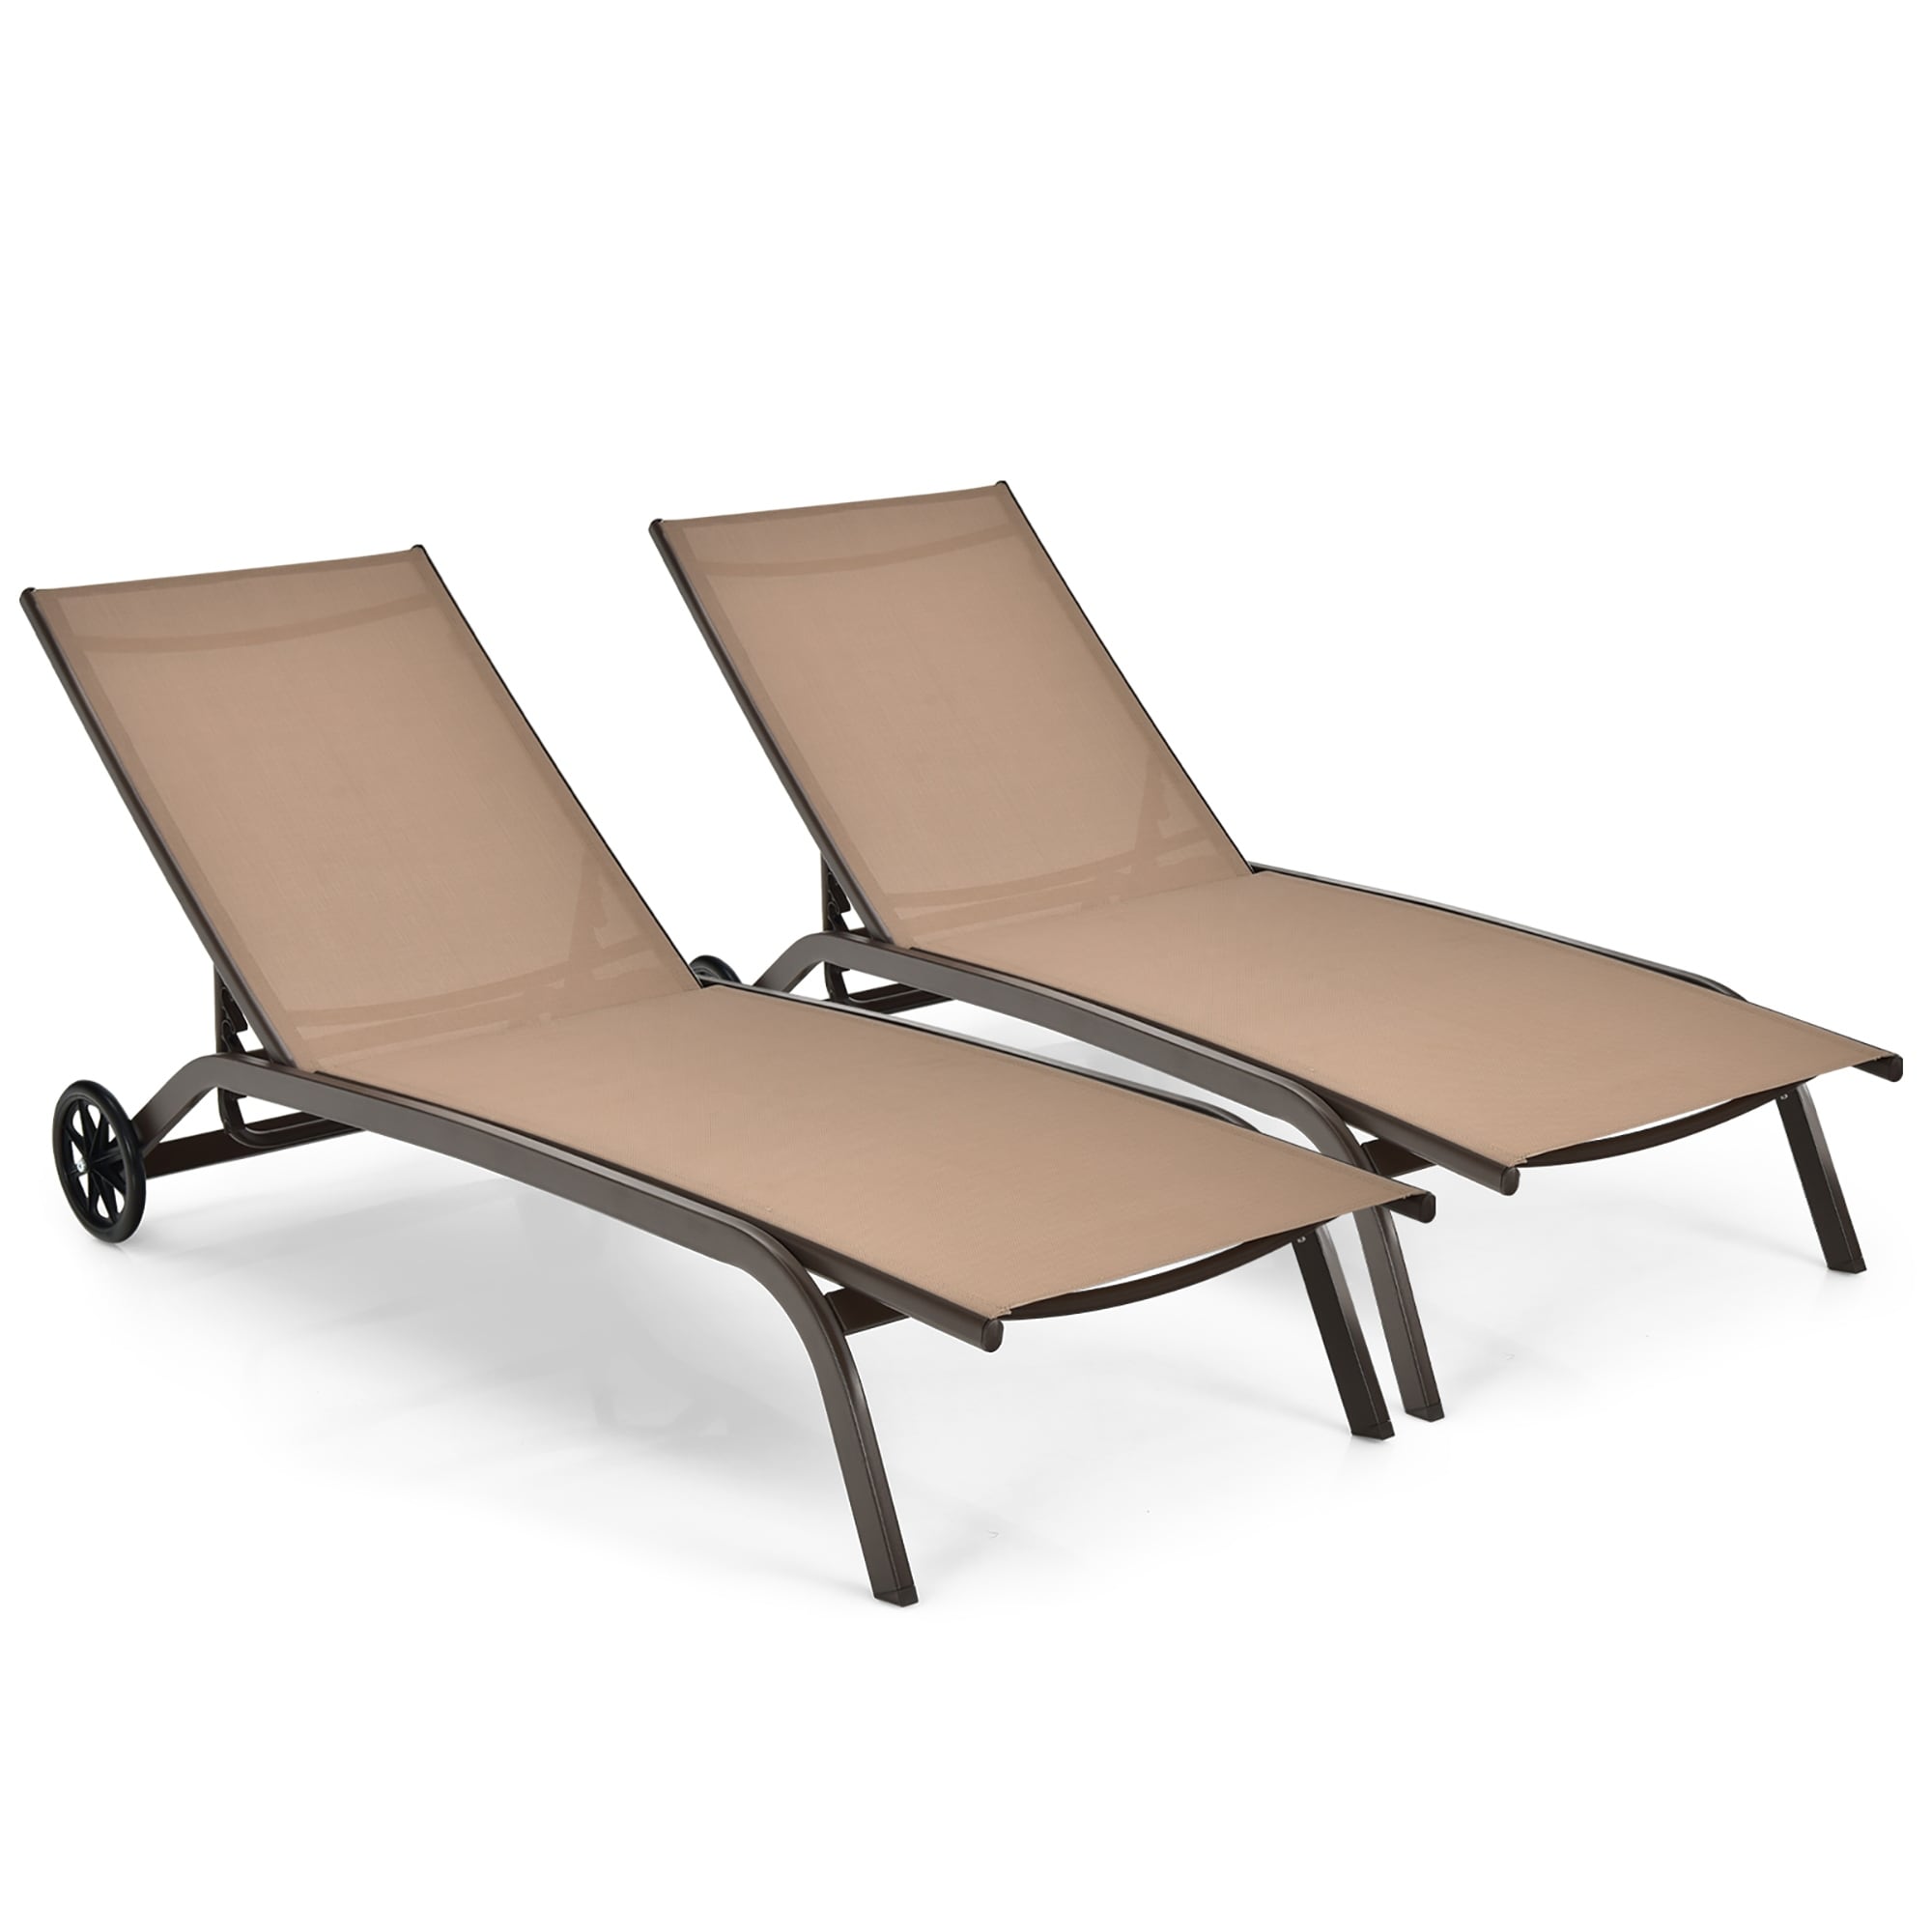 Patio Lounge Chairs Outdoor Chaise Lounge With 6 Adjustable Positions